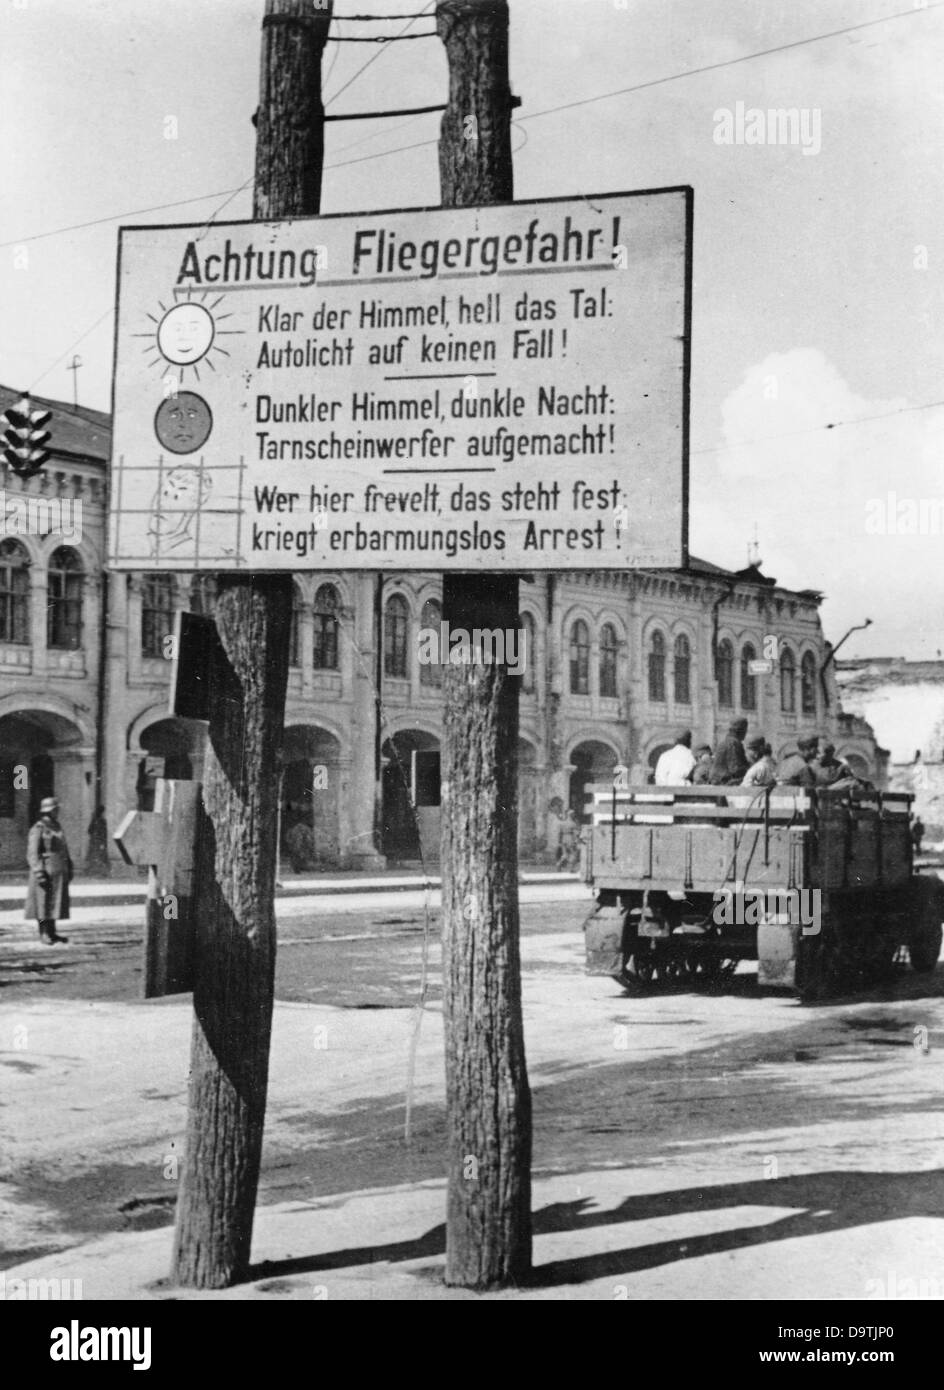 The Nazi Propaganda! on the back of the image reads: 'A humorous verse on a crossroads in Orel.' (German rhymes roughly translated: 'Watch out for aircrafts! Clear sky, bright valley: Turn the carlights off' Dark sky, dark night: Turn on the blackout driving light! Who does not behave, that is clear: will be arrested without pity!') Image from the Eastern Front/Russia, 16 June 1943. The attack on the Soviet Union by the German Reich was agreed on in July 1940 and prepared as the 'Operation Barbarossa' since December 1940. On 22 June 1941, the invasion by the German Wehrmacht started. Photo: Be Stock Photo